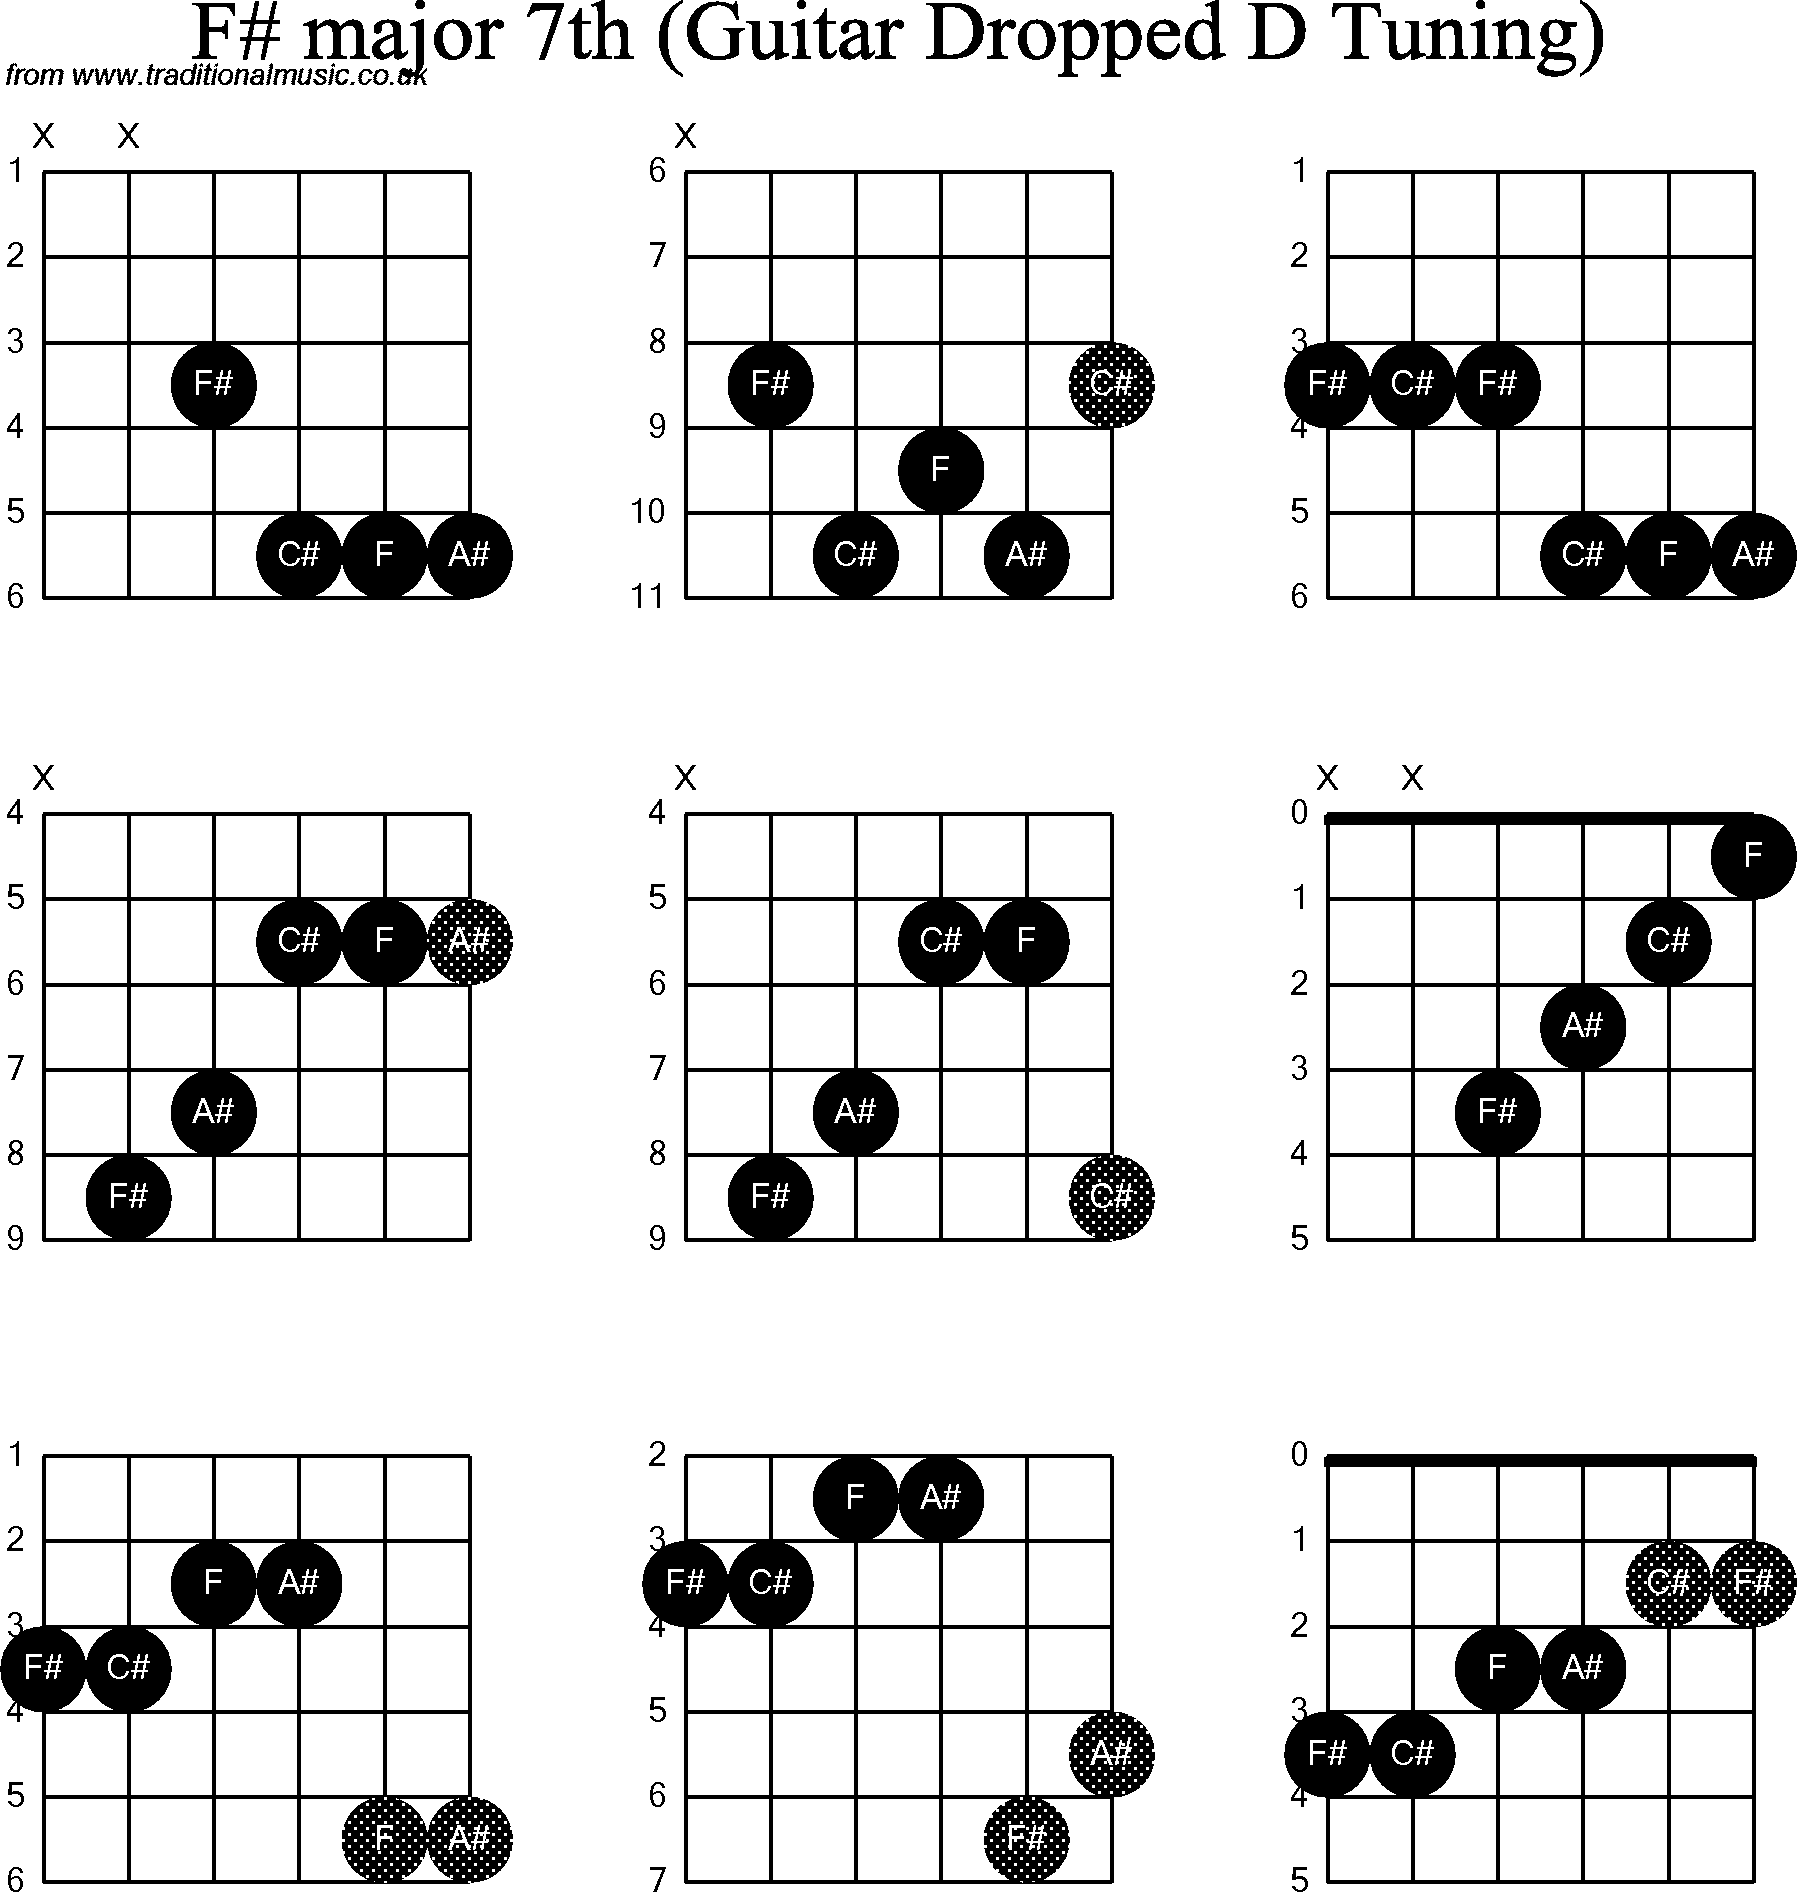 Chord diagrams for dropped D Guitar(DADGBE), F Sharp Major7th